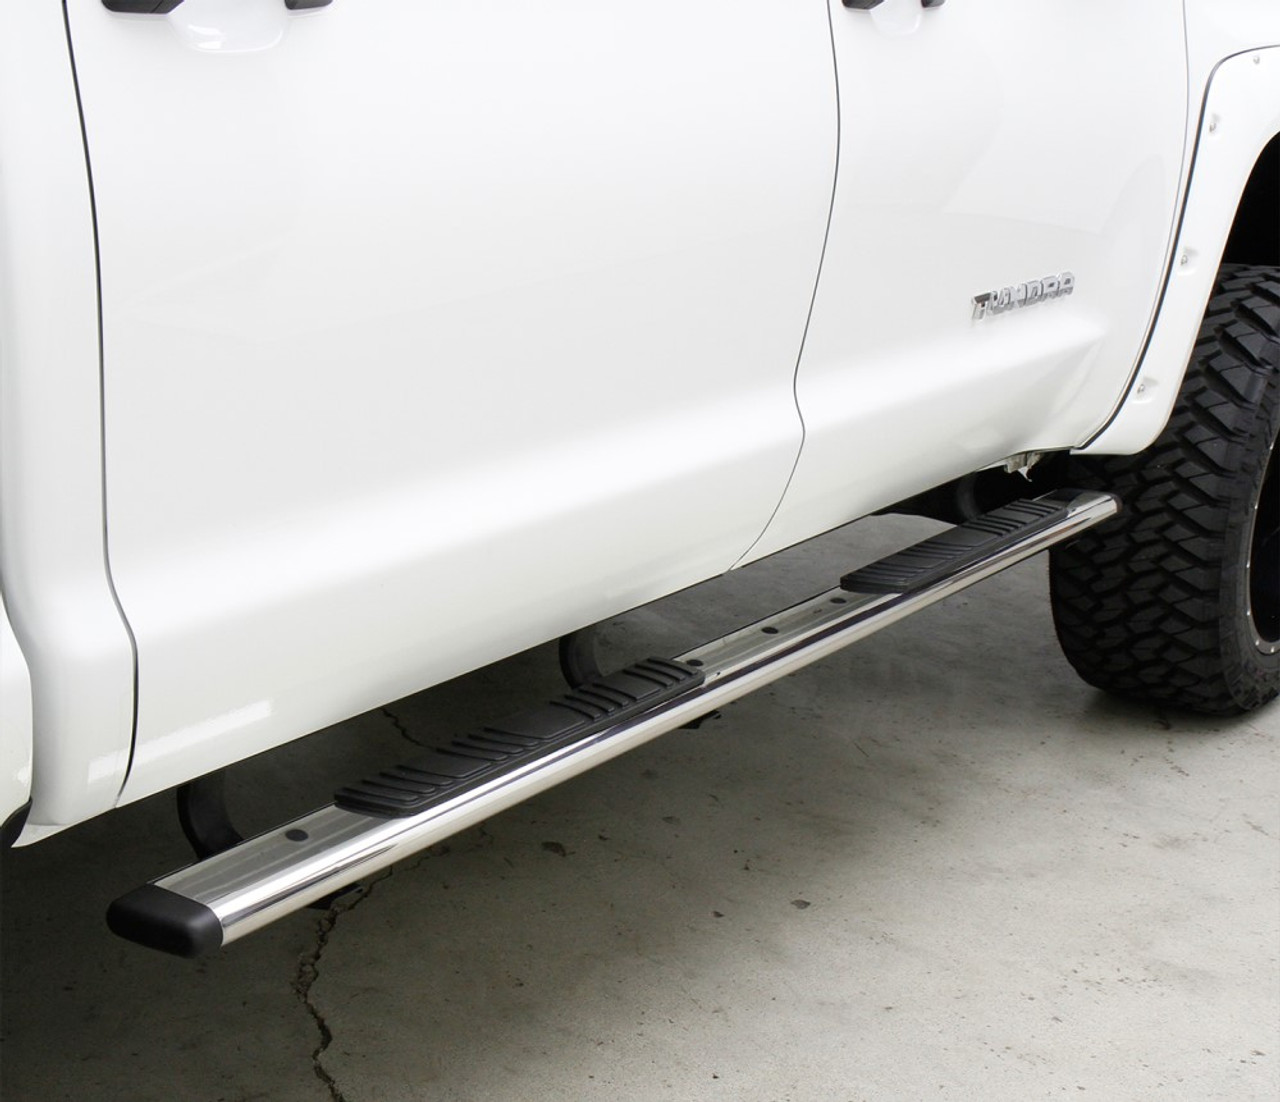 Go Rhino 685413367B Ford, Escape, 2013 - 2015, 5 inch OE Xtreme Low Profile - Complete Kit: Sidesteps + Brackets, Mild steel, Black, 650067B side bars + 6841335 OE Xtreme Brackets. 5 inch wide x 67 inch long side bars